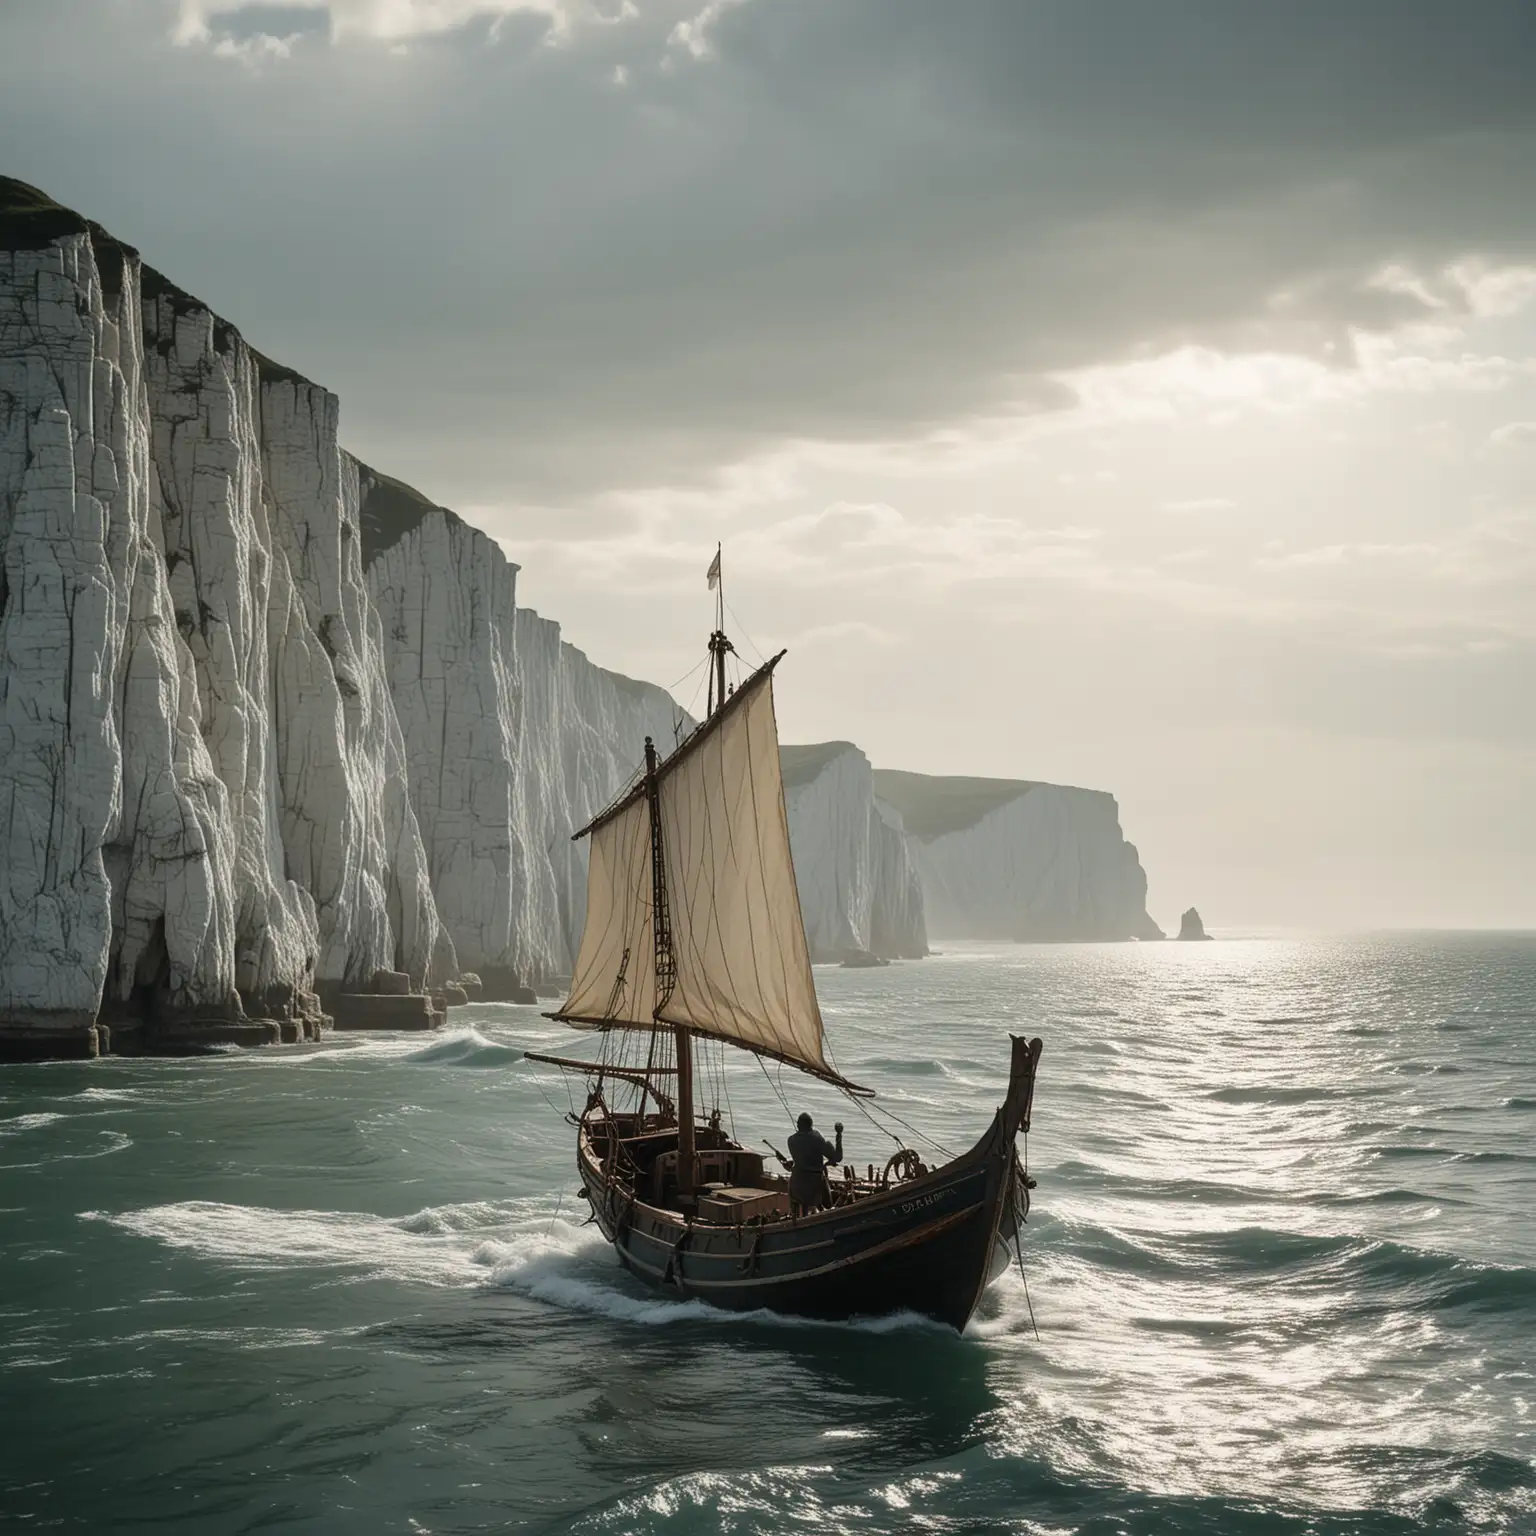 Sailing Adventure Medieval Fishing Boat on Open Sea with Dover